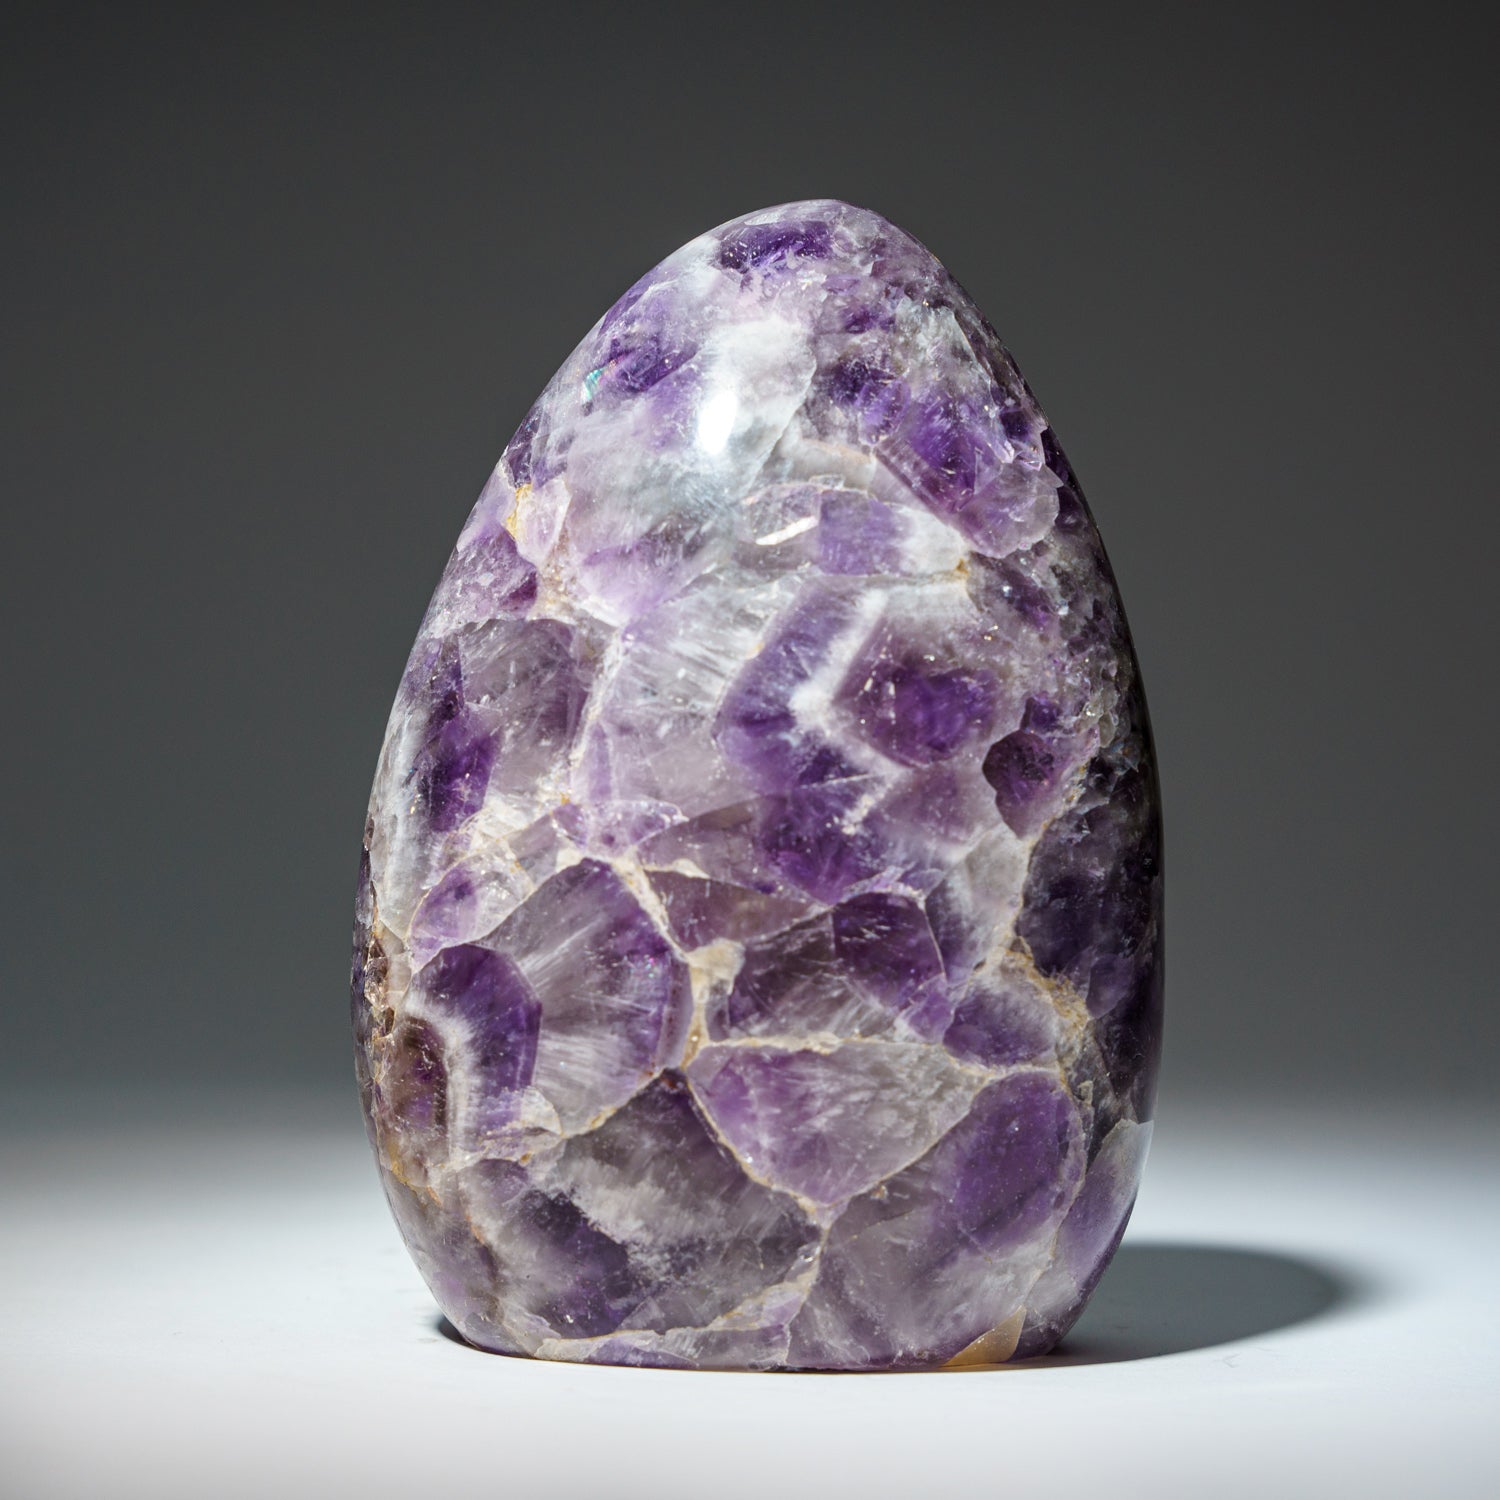 Polished Chevron Amethyst Freefrom from Brazil (4.3 lbs)